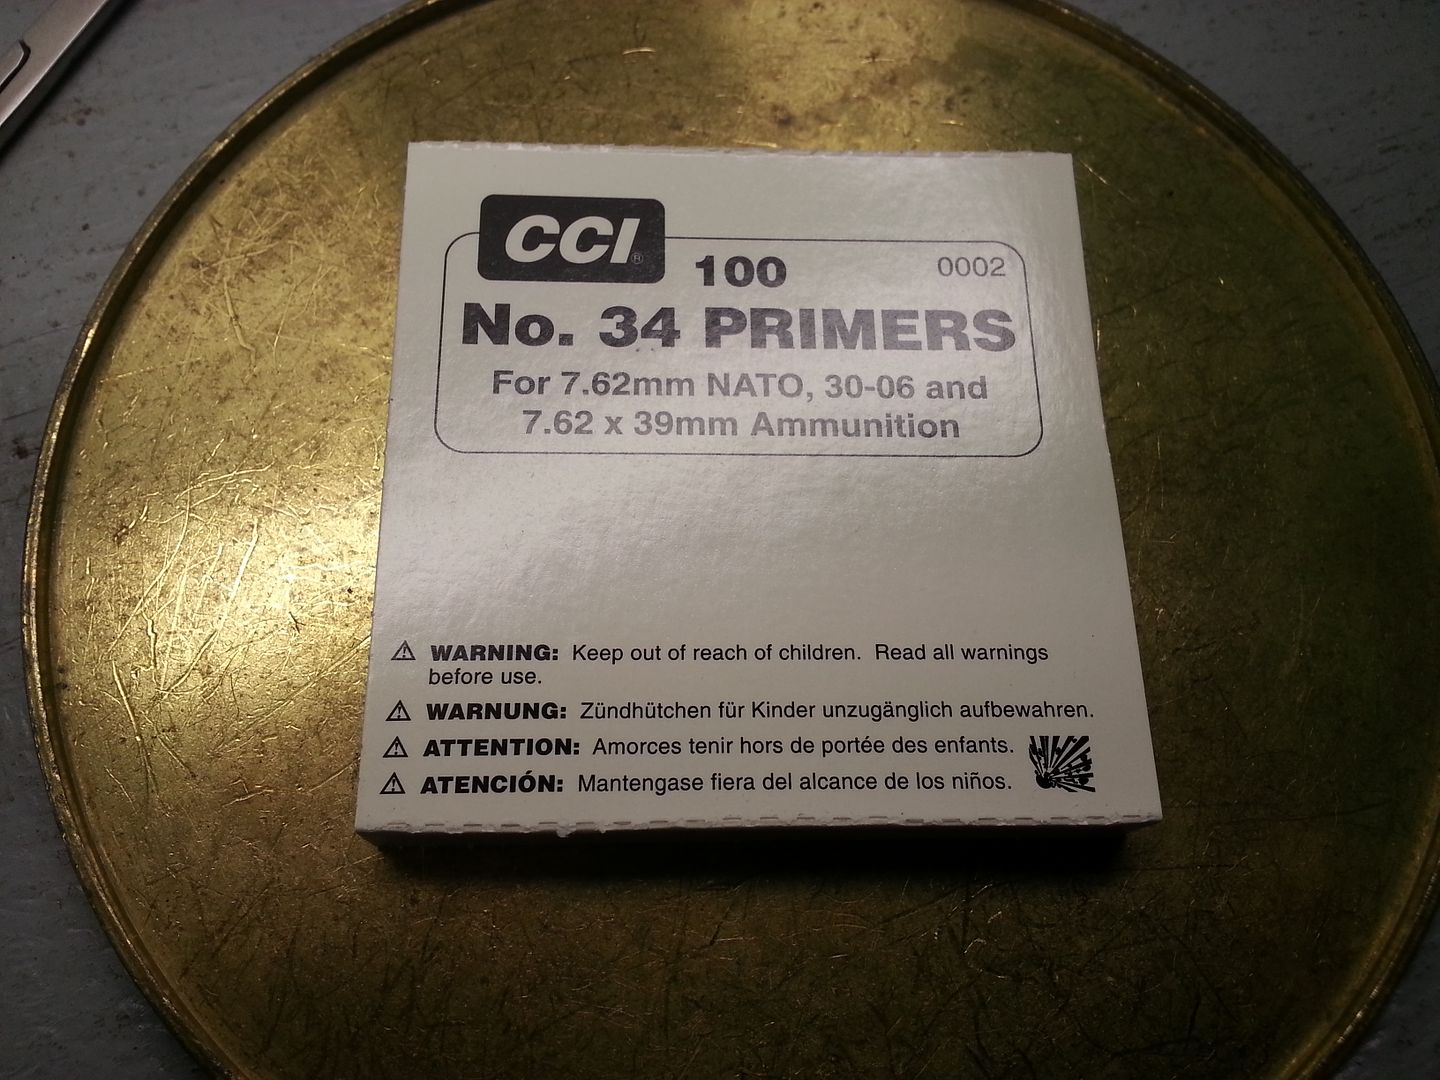 cci primer recommended seating depth